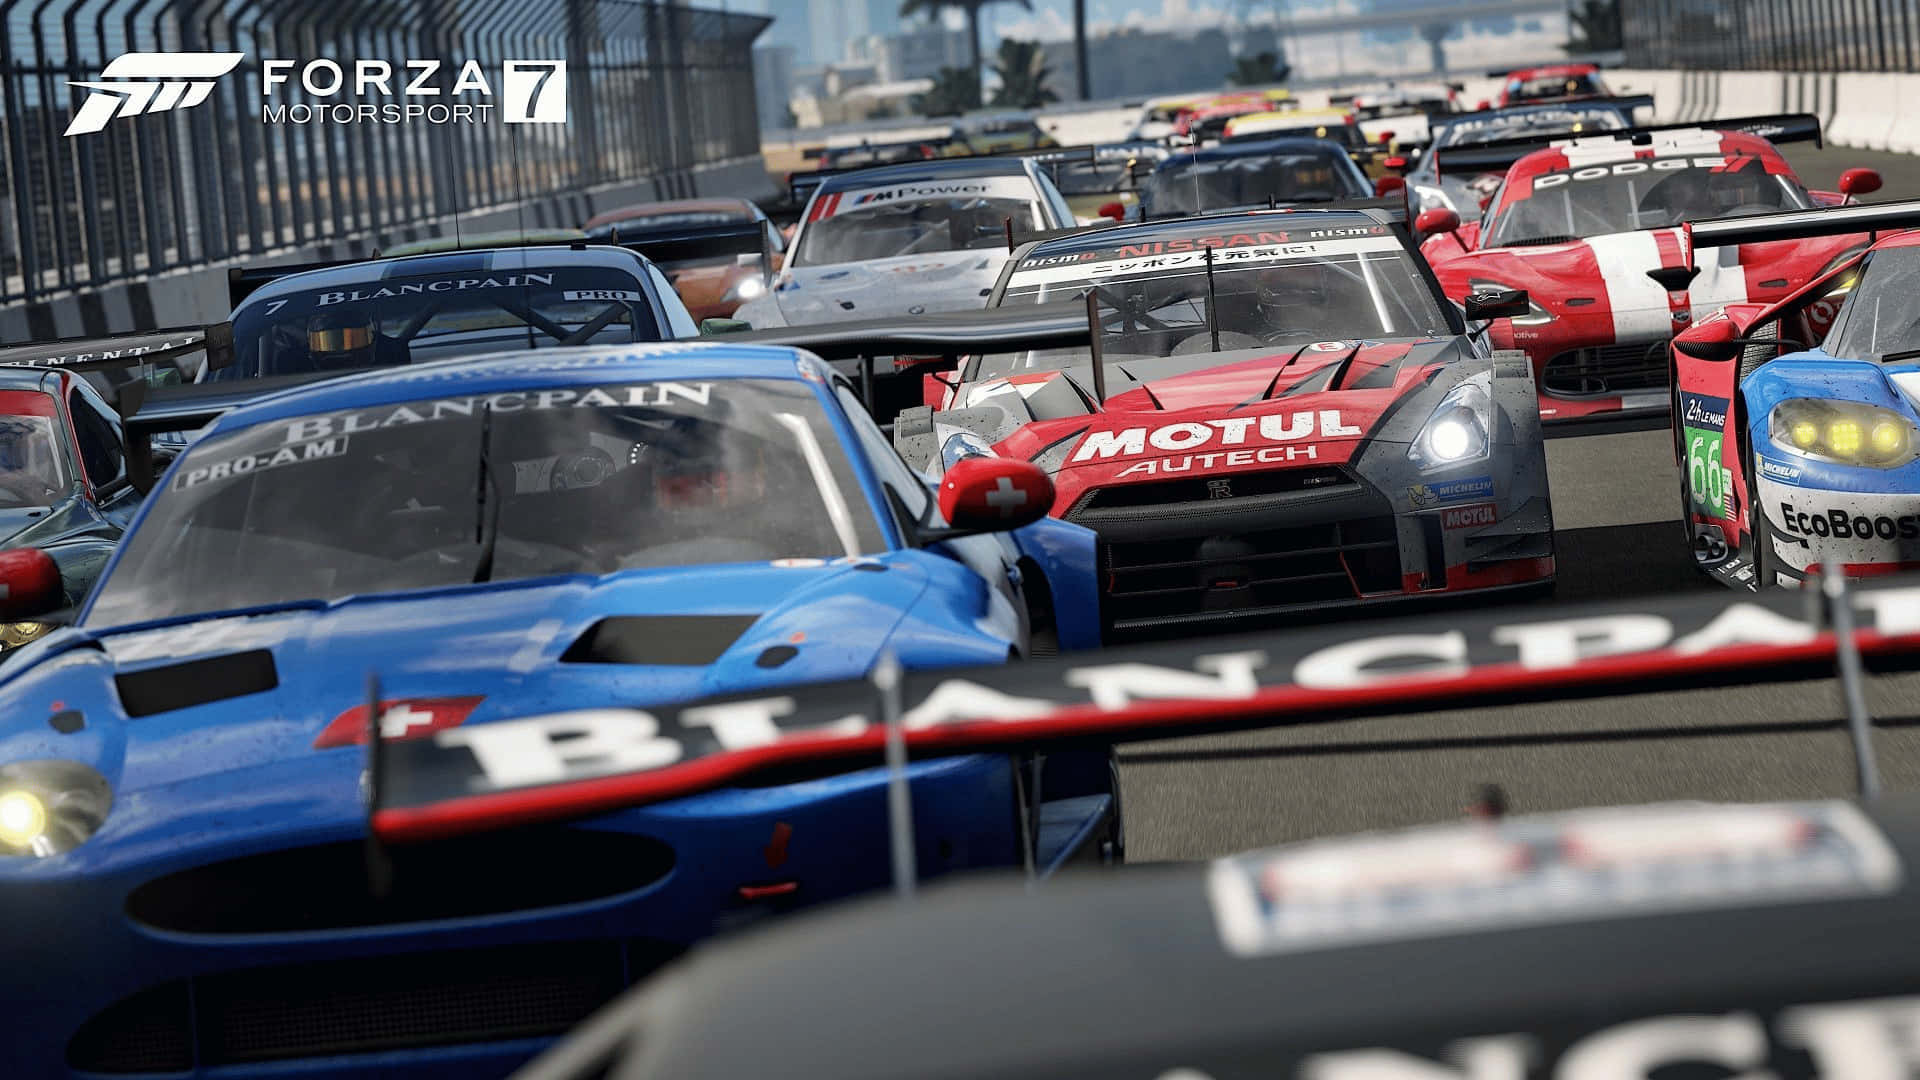 Accelerate to the Finish Line in Forza Motorsport 7